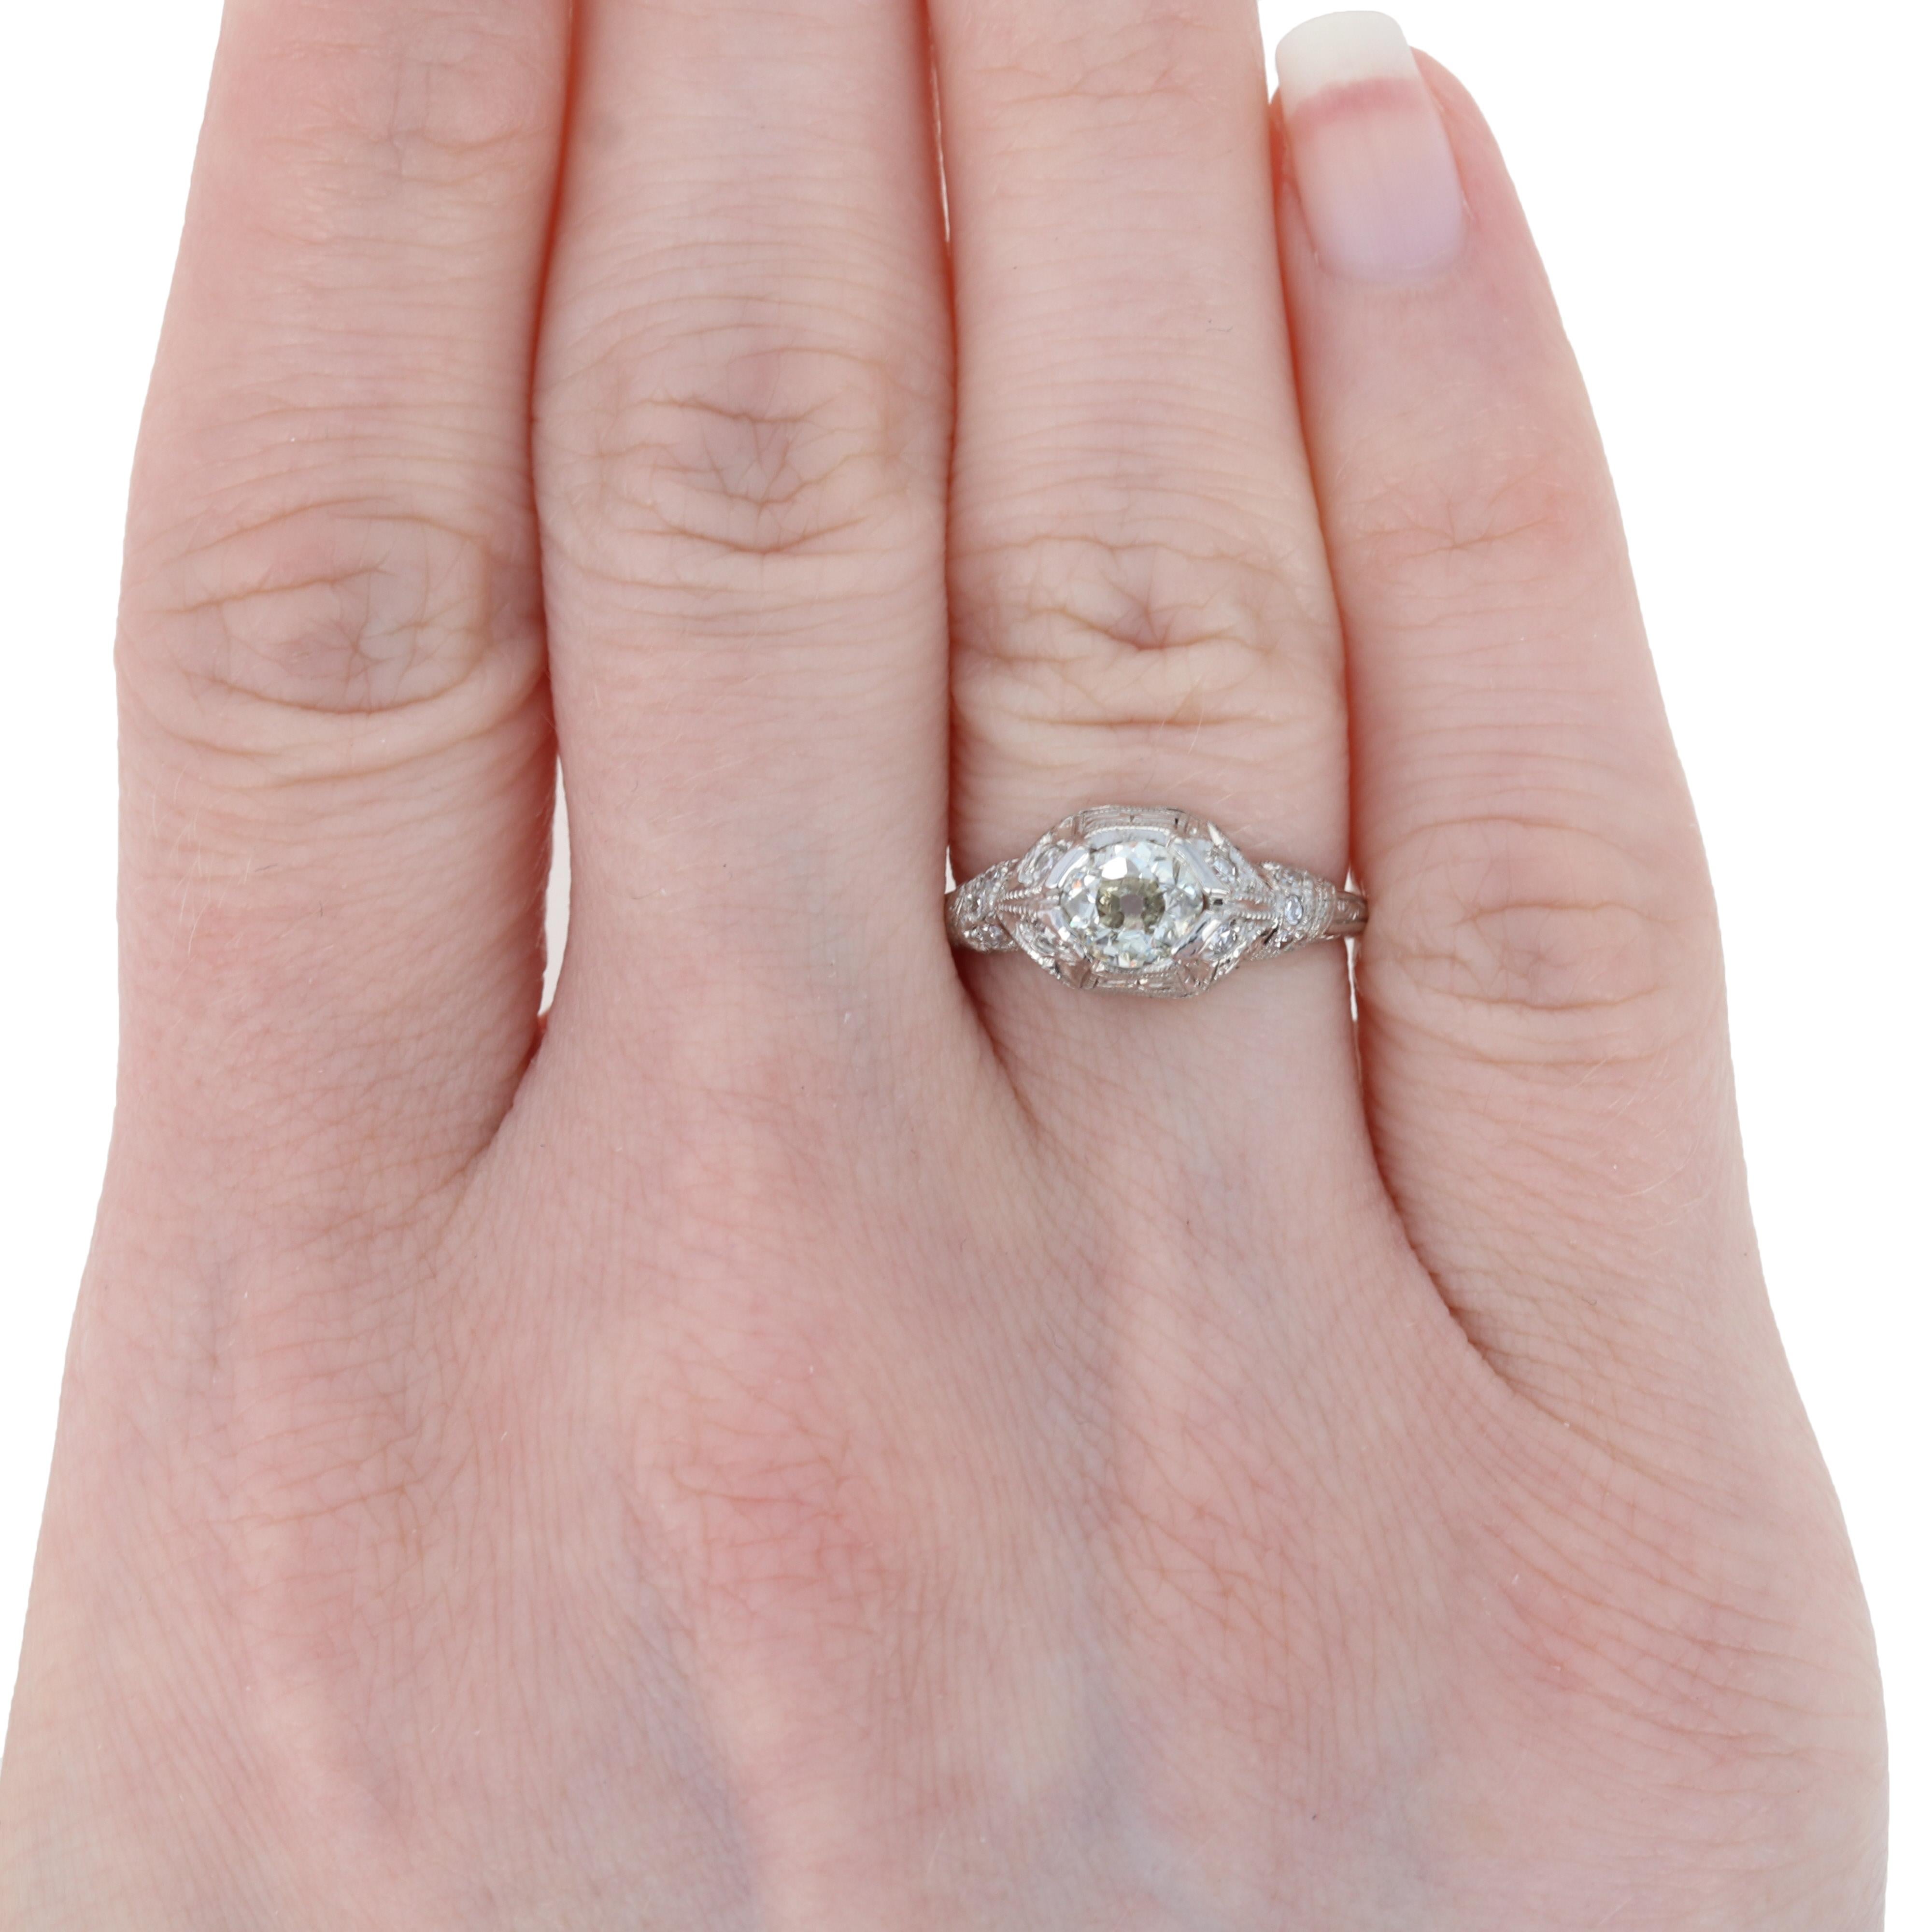 Carry forward the time-honored values of true love and lifetime commitment when you propose with a vintage engagement ring! This exquisite ring is an Art Deco piece dating from the 1920?s - 1930?s, an era that valued innovative design and meticulous